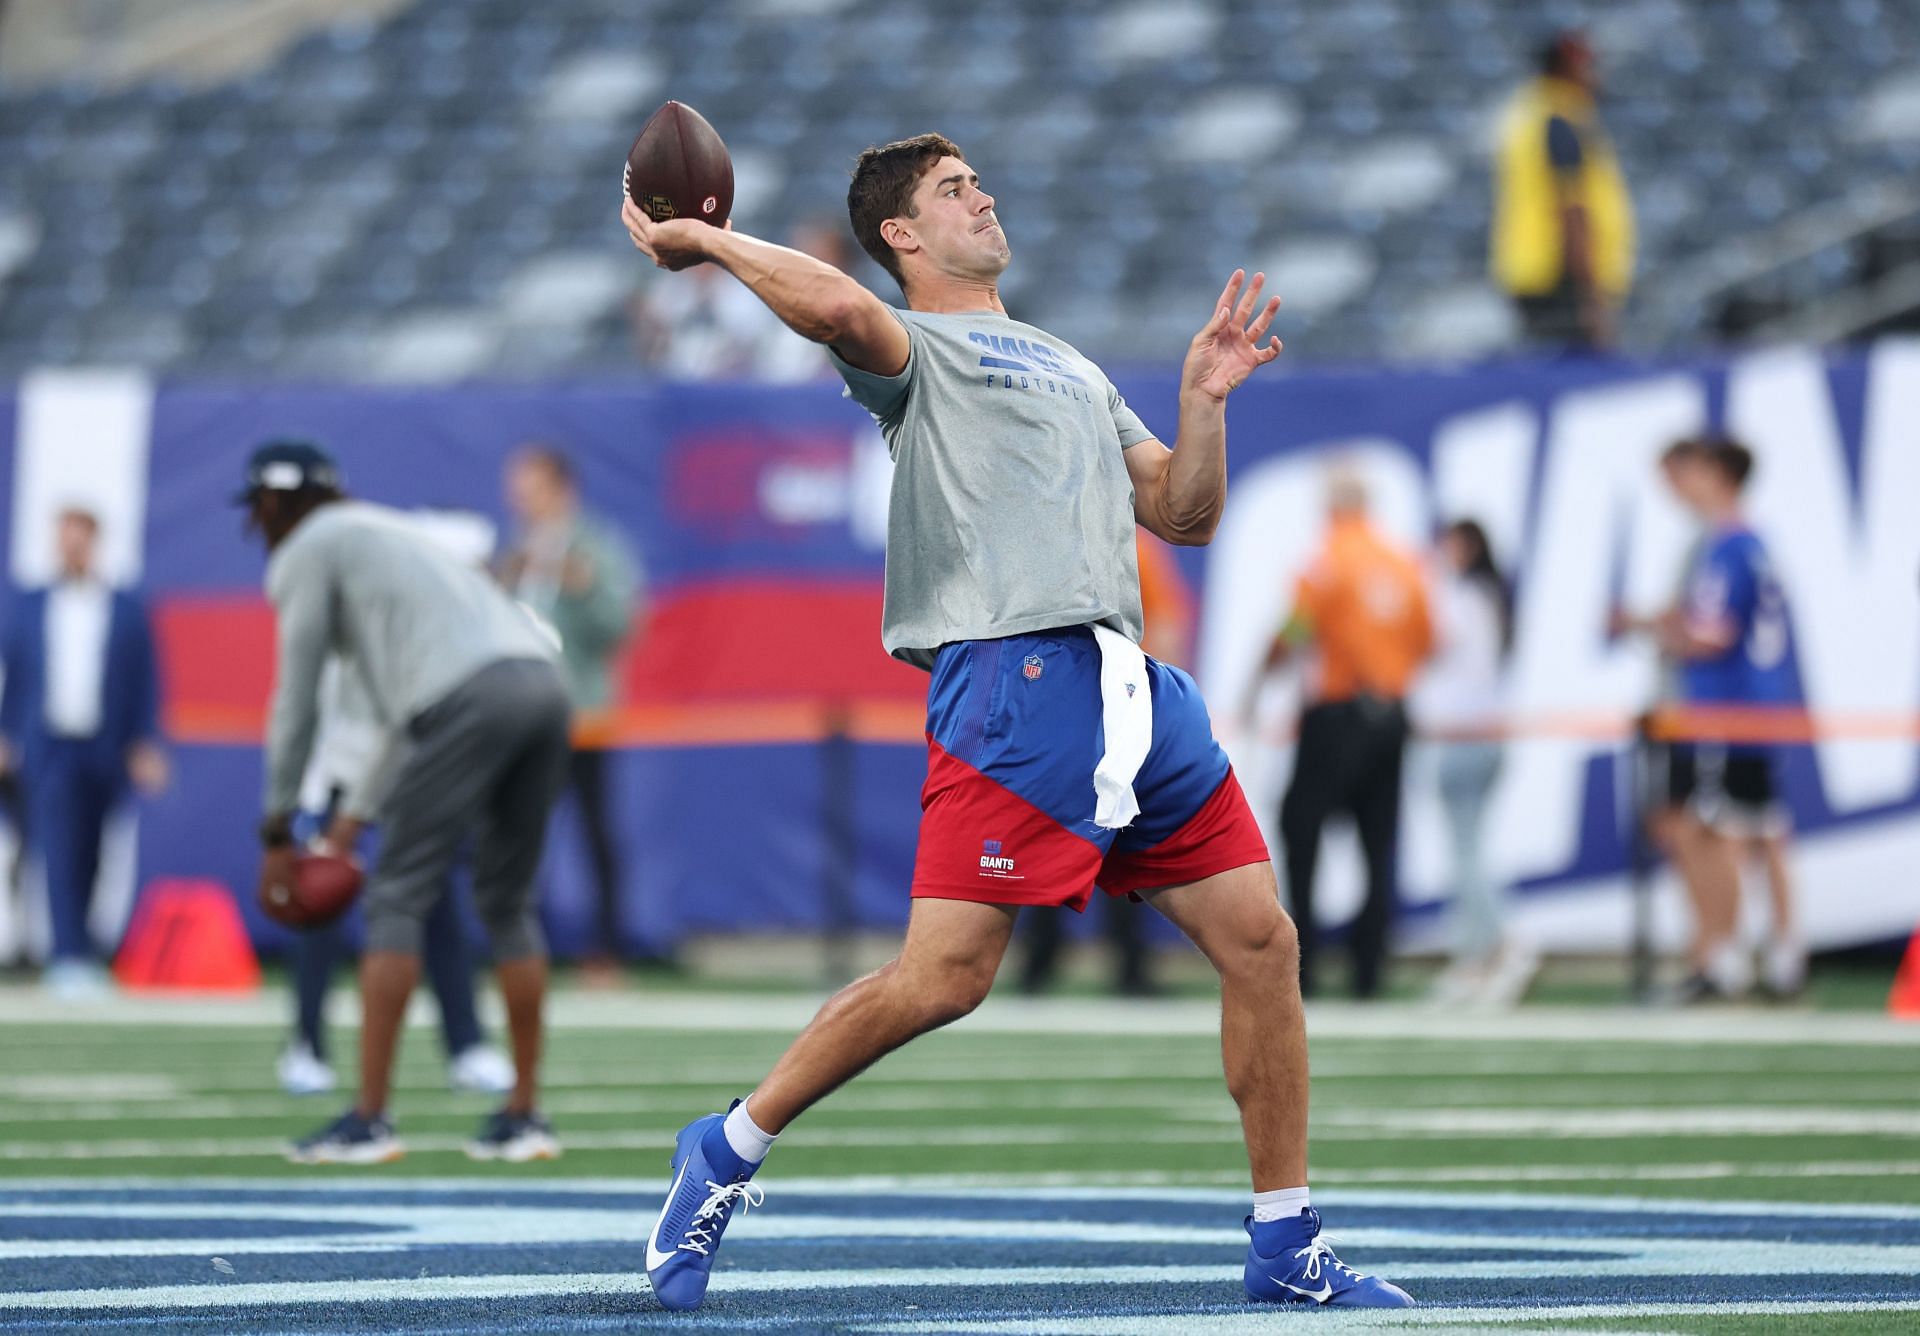 Daniel Jones Grilled by NFL Fans During Disastrous First Half Against  Cowboys - Sports Illustrated